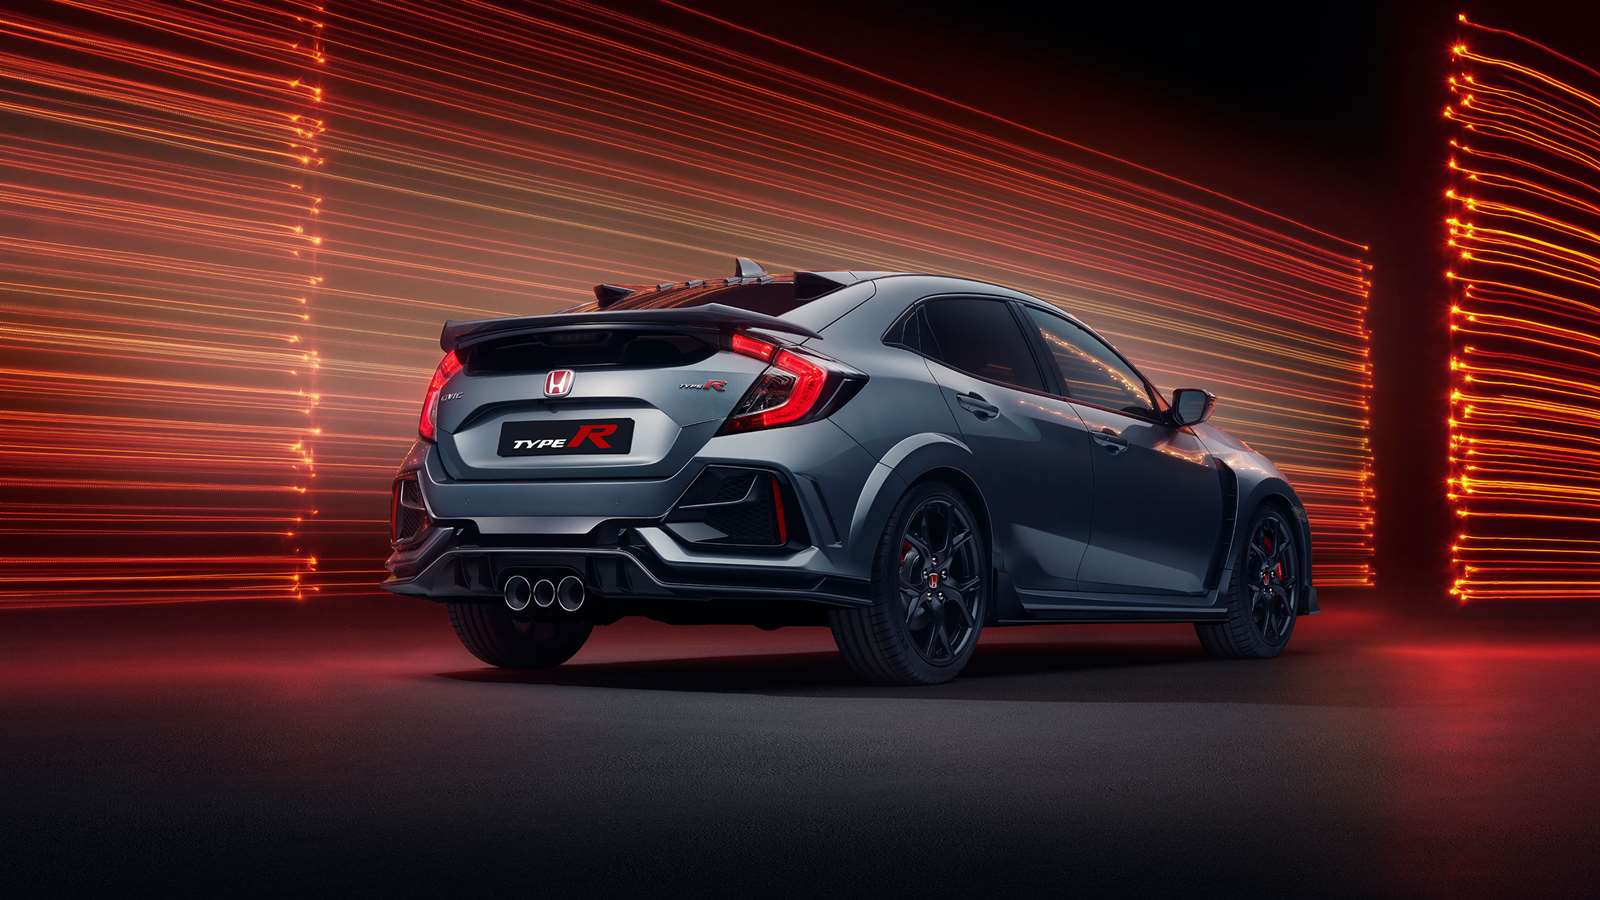 2020 Civic Type R Comes With Two Special Editions And No Wing